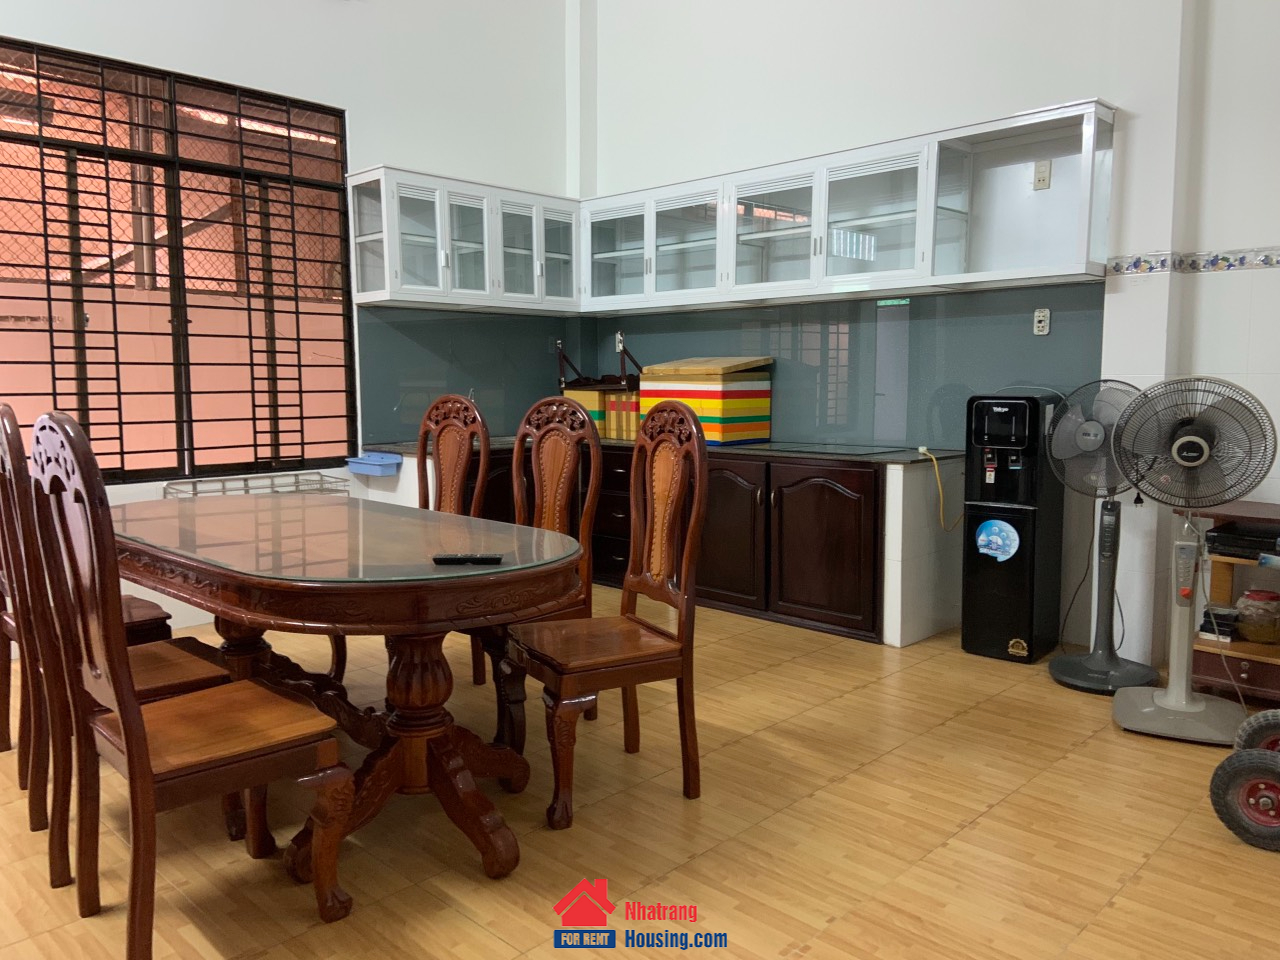 House for rent in Vĩnh Hòa ward, North of Nha Trang | 3 floors, 3 bedrooms | 10 million